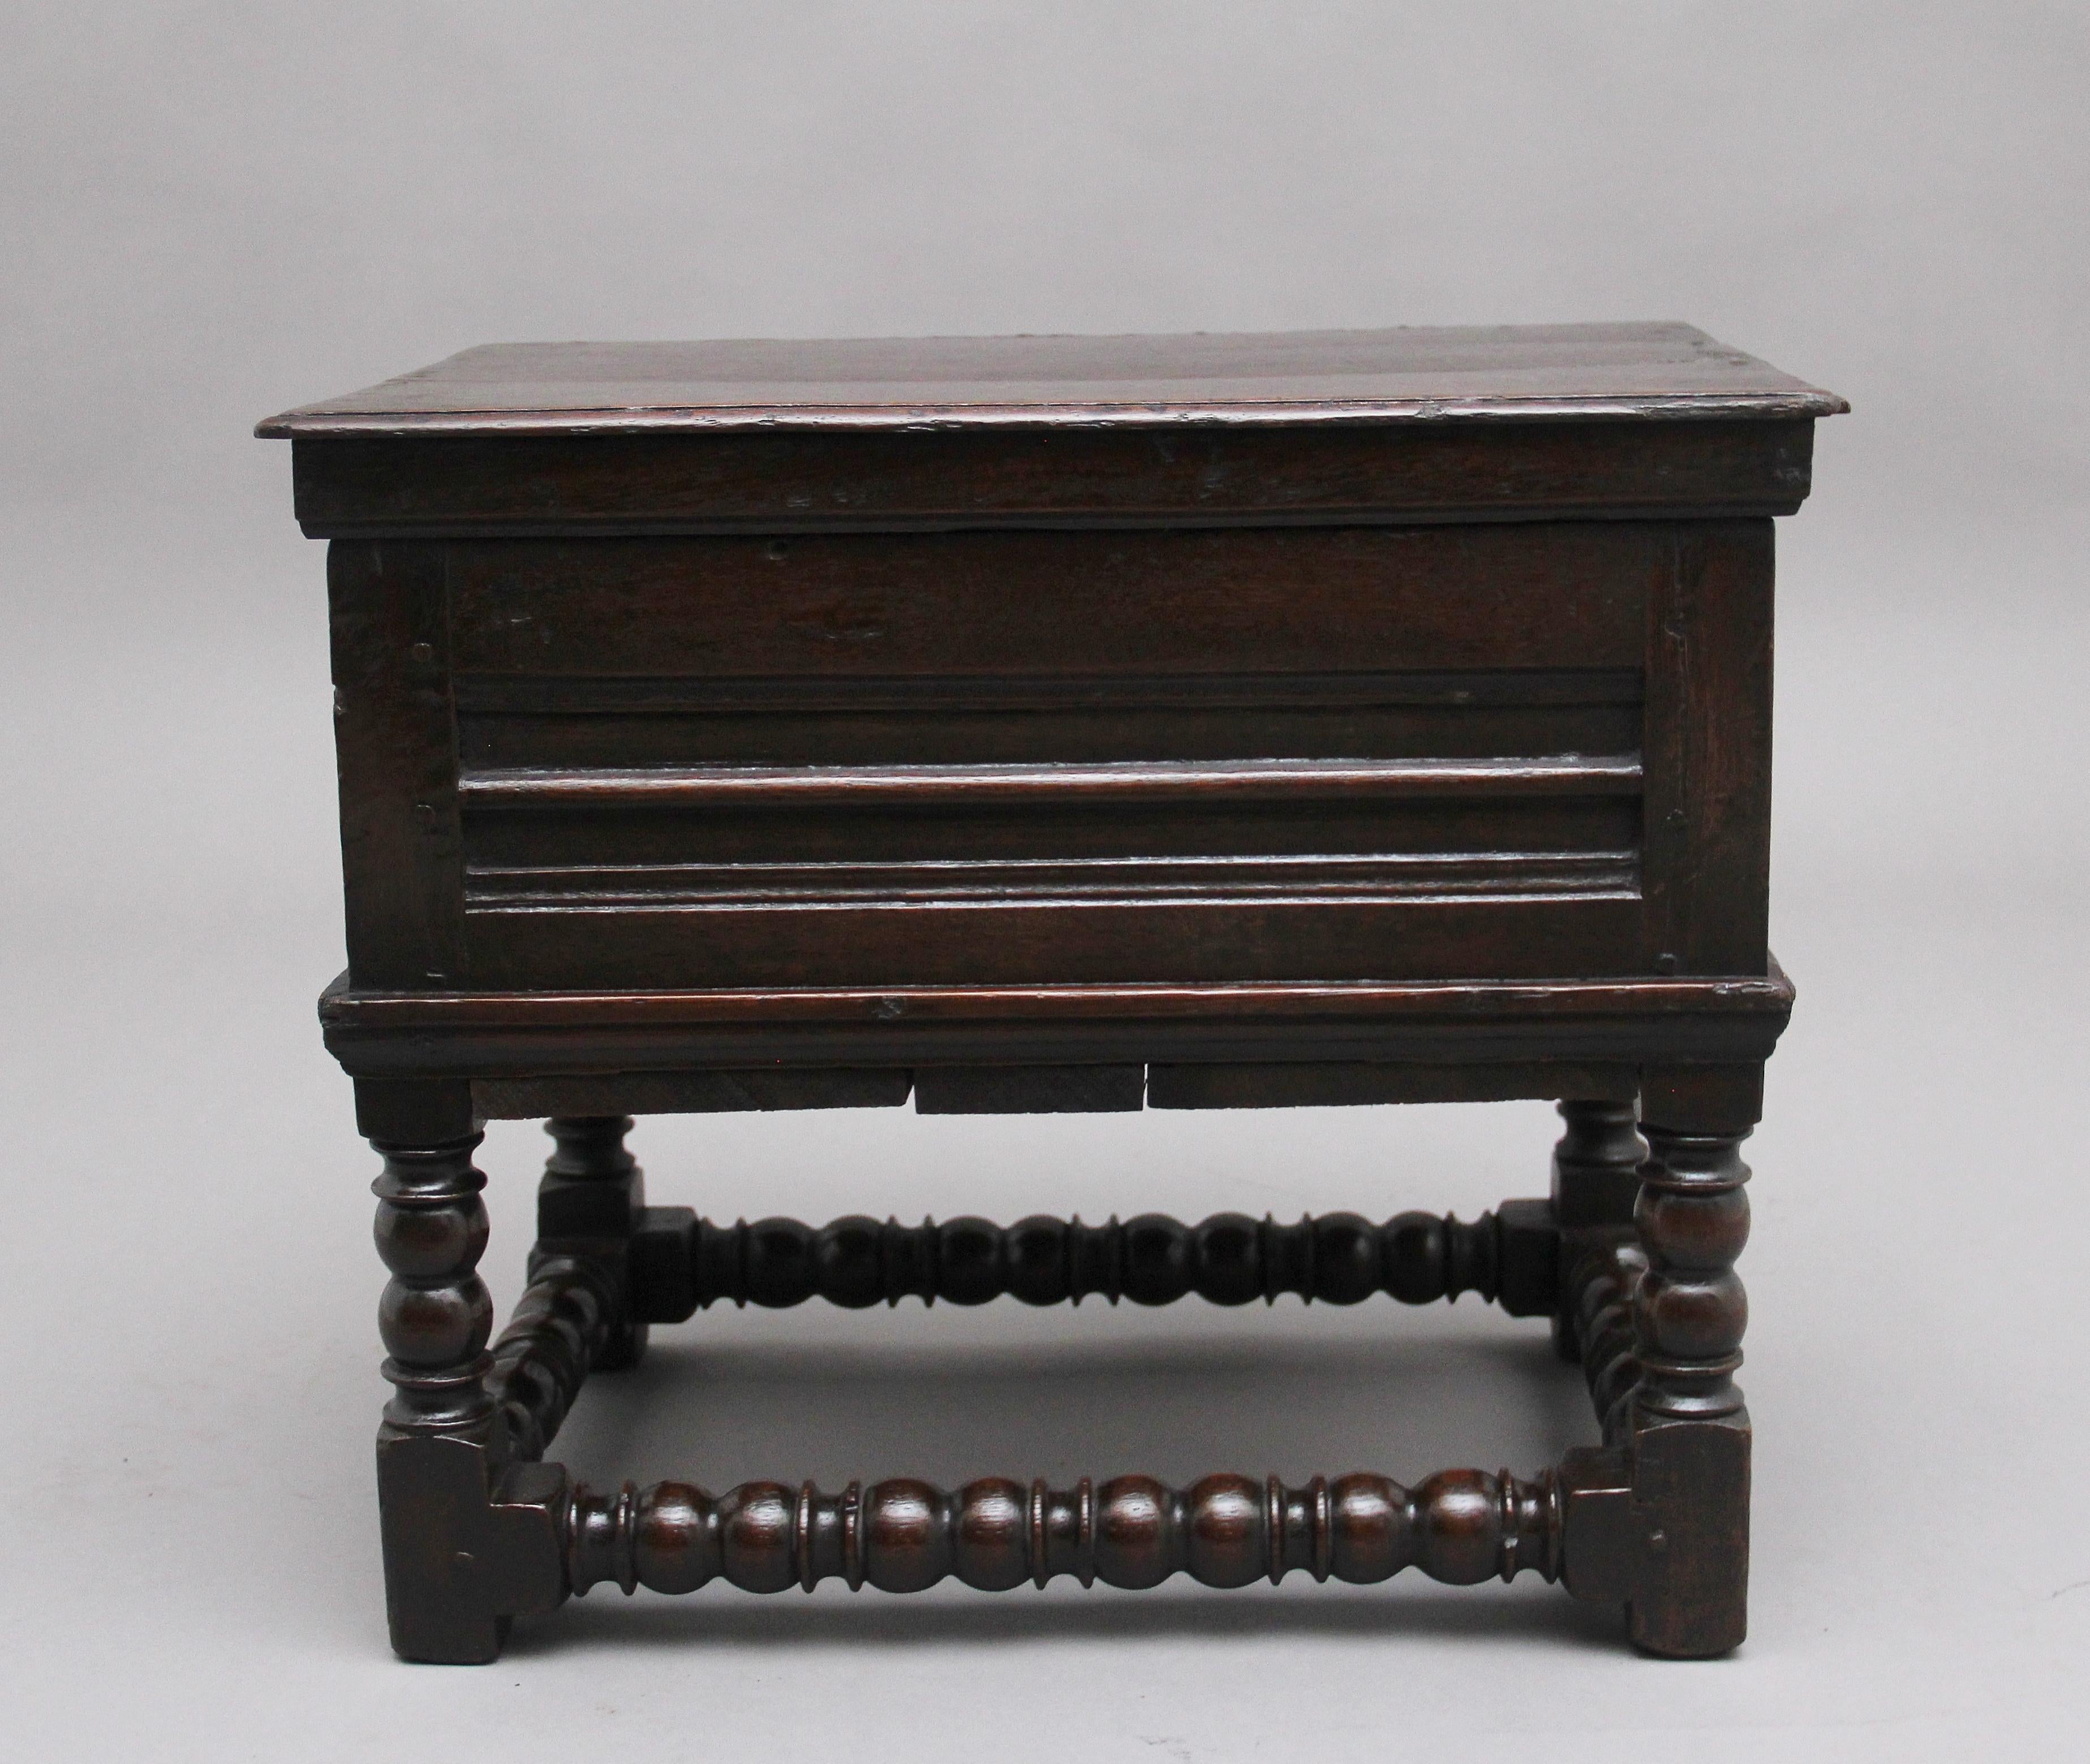 Early 18th century oak box stool, the moulded edge hinged top opening to reveal a large compartment space, moulded panels below on the front and sides, supported on bobbin turned legs and stretchers. Circa 1740.
 